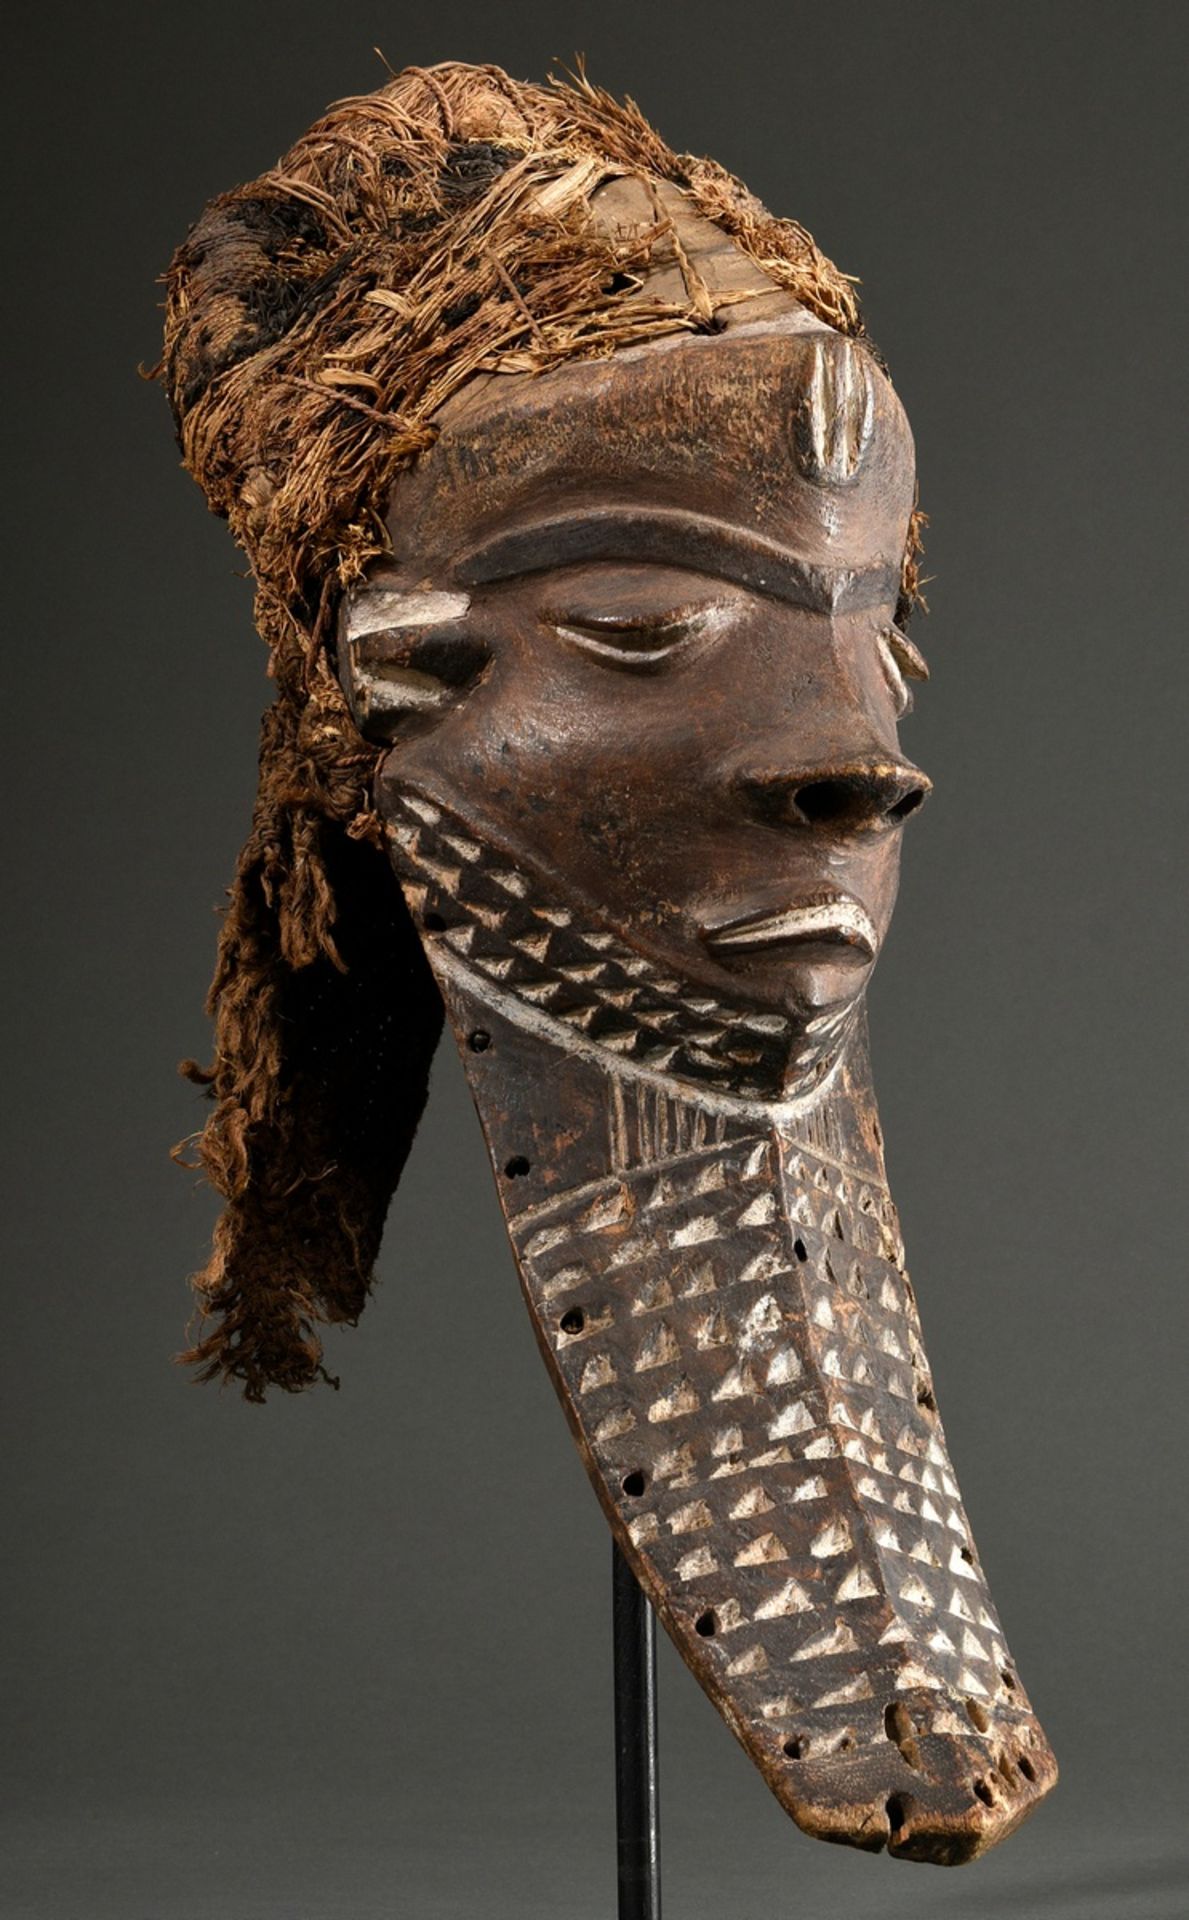 Kiwoyo Mask of the Pende, Central Africa/ Congo (DRC), early 20th c., wood with traces of pigment a